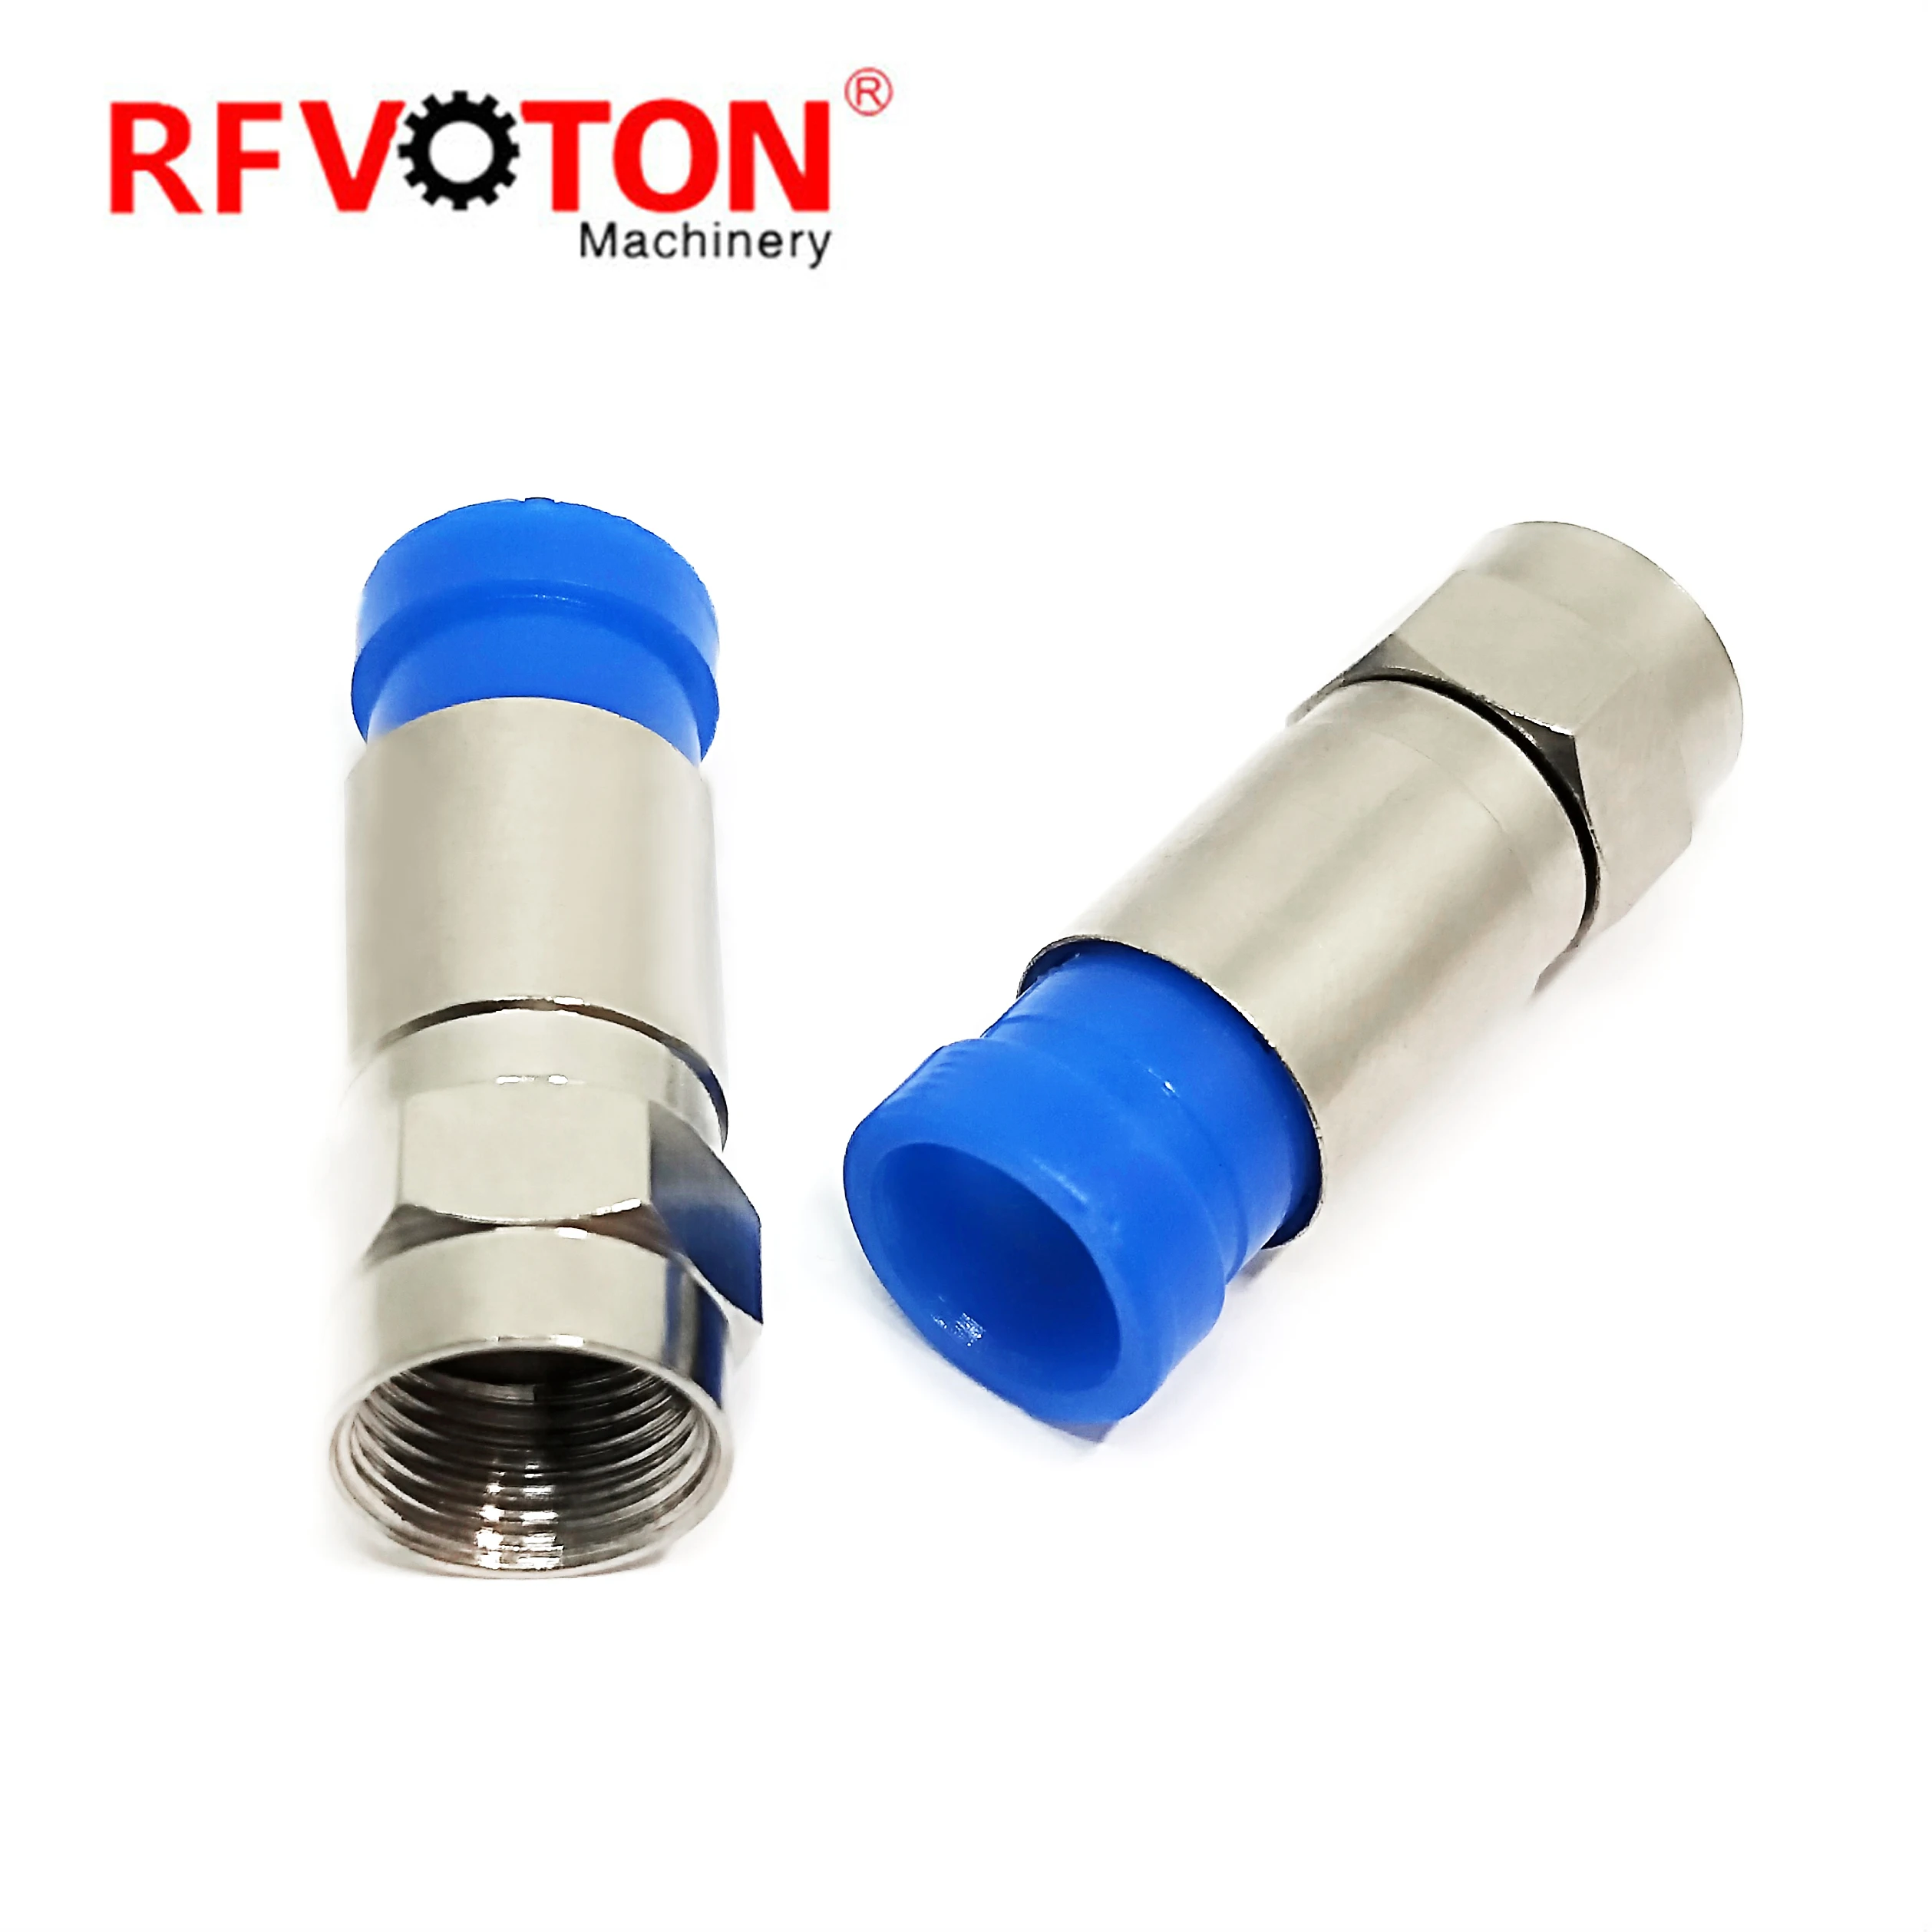 Factory supply low price F male plug straight compression rg6 cable rf coaxial connectors in stock details